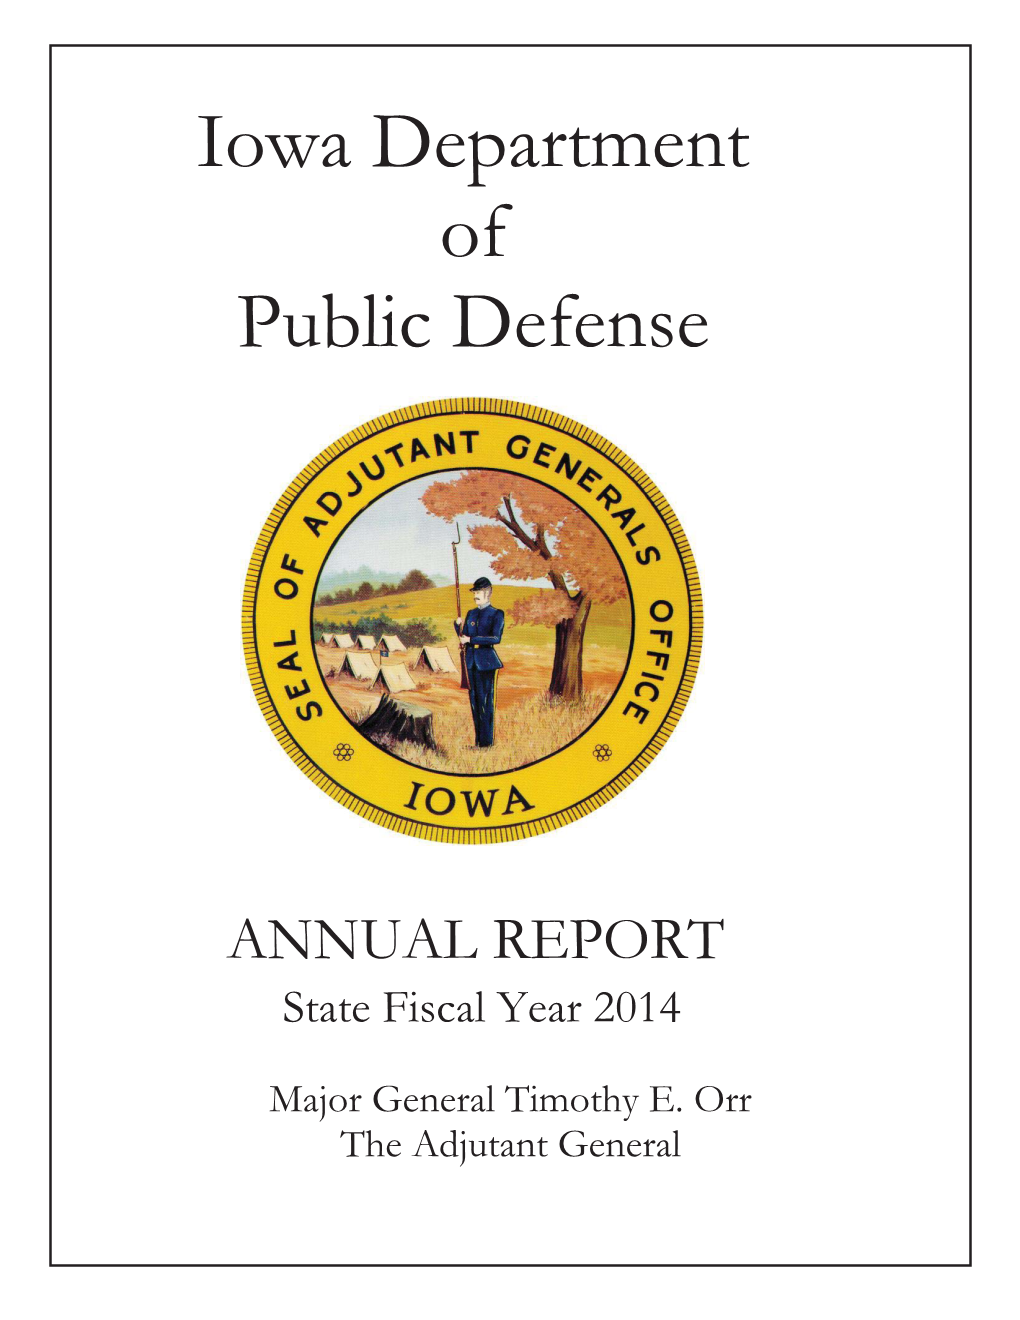 Fiscal Year 2014 Annual Report